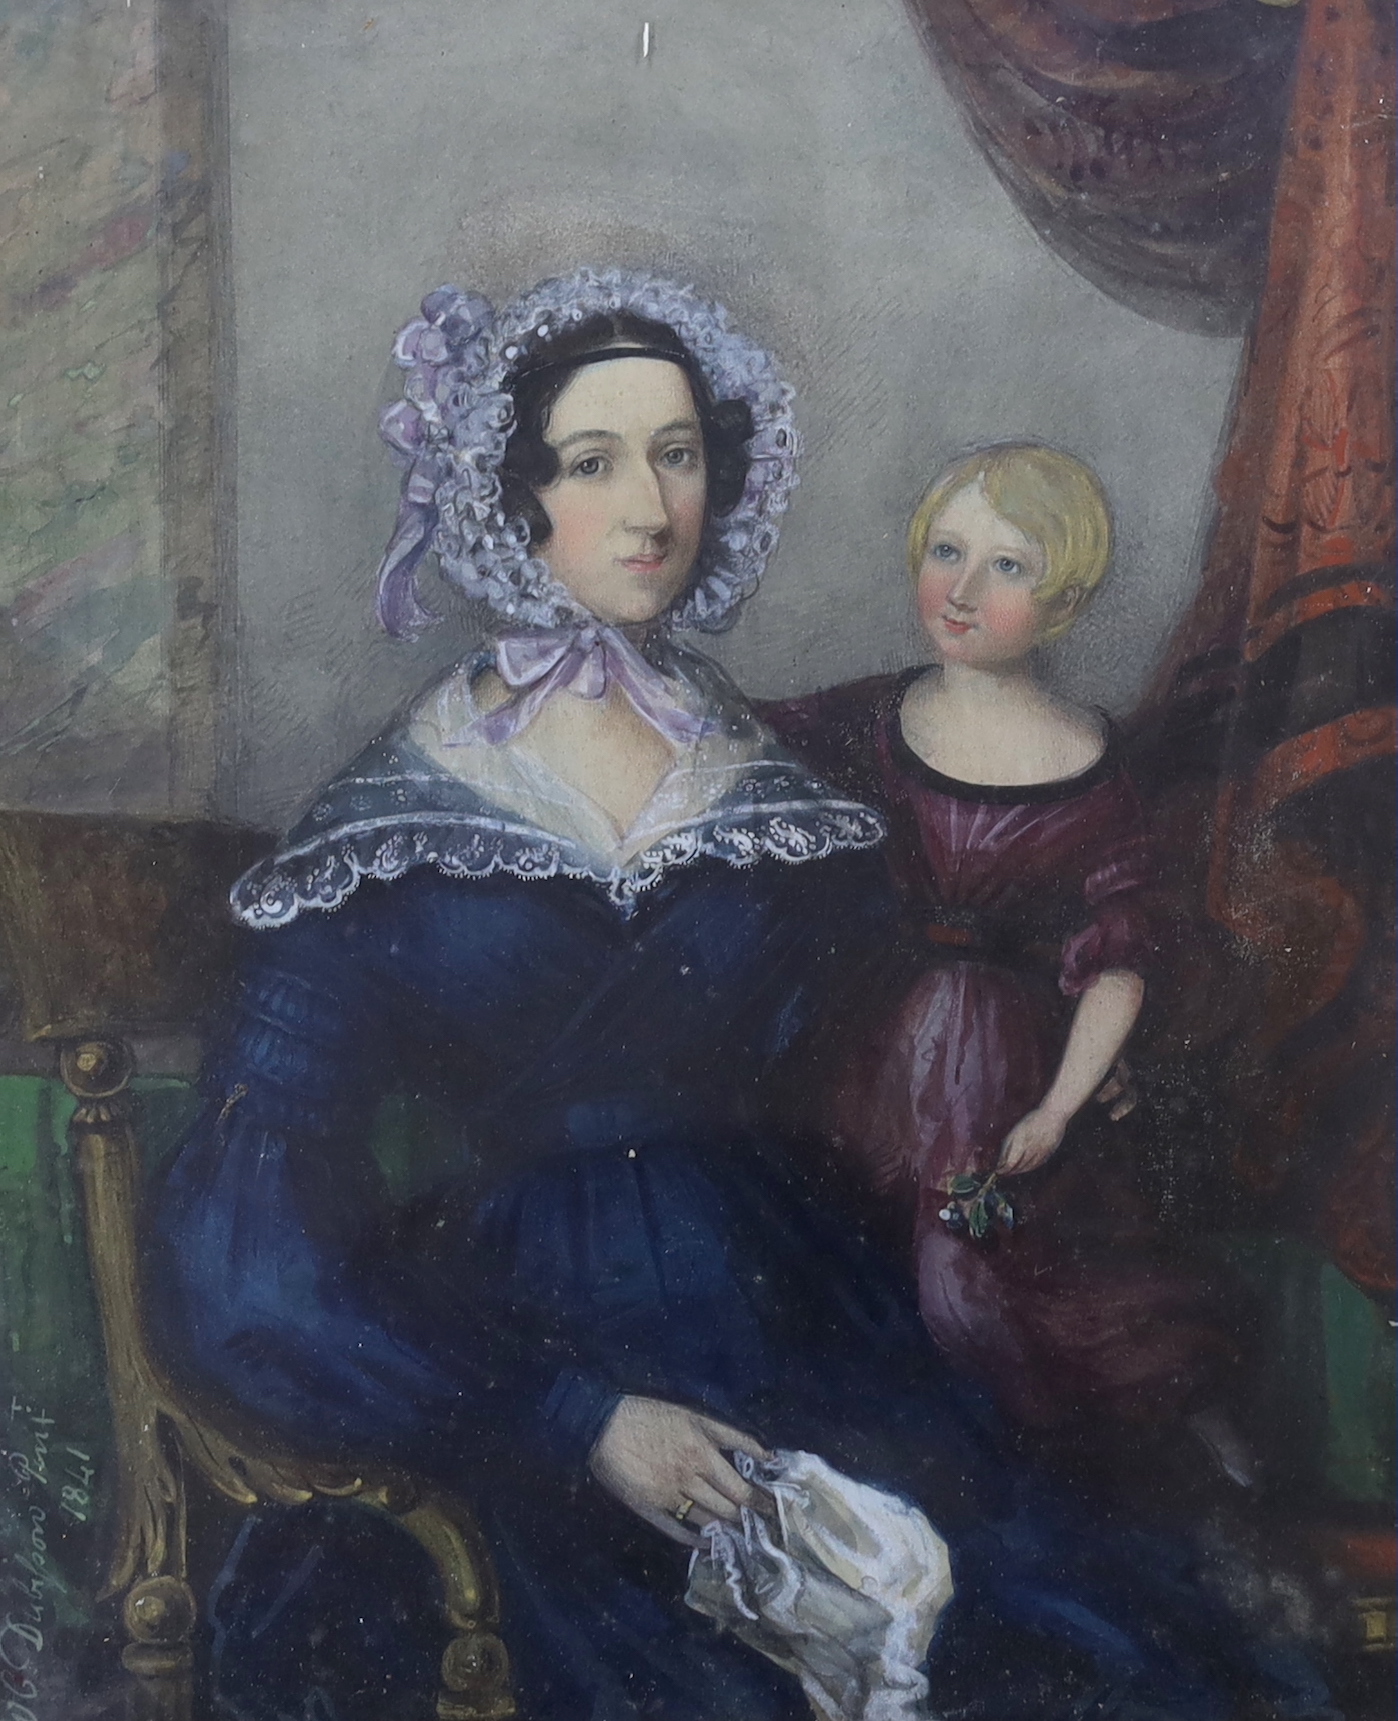 W. C. Dobson, 19th century watercolour, Mother and child in an interior, signed and dated 1841, 30cm x 24cm